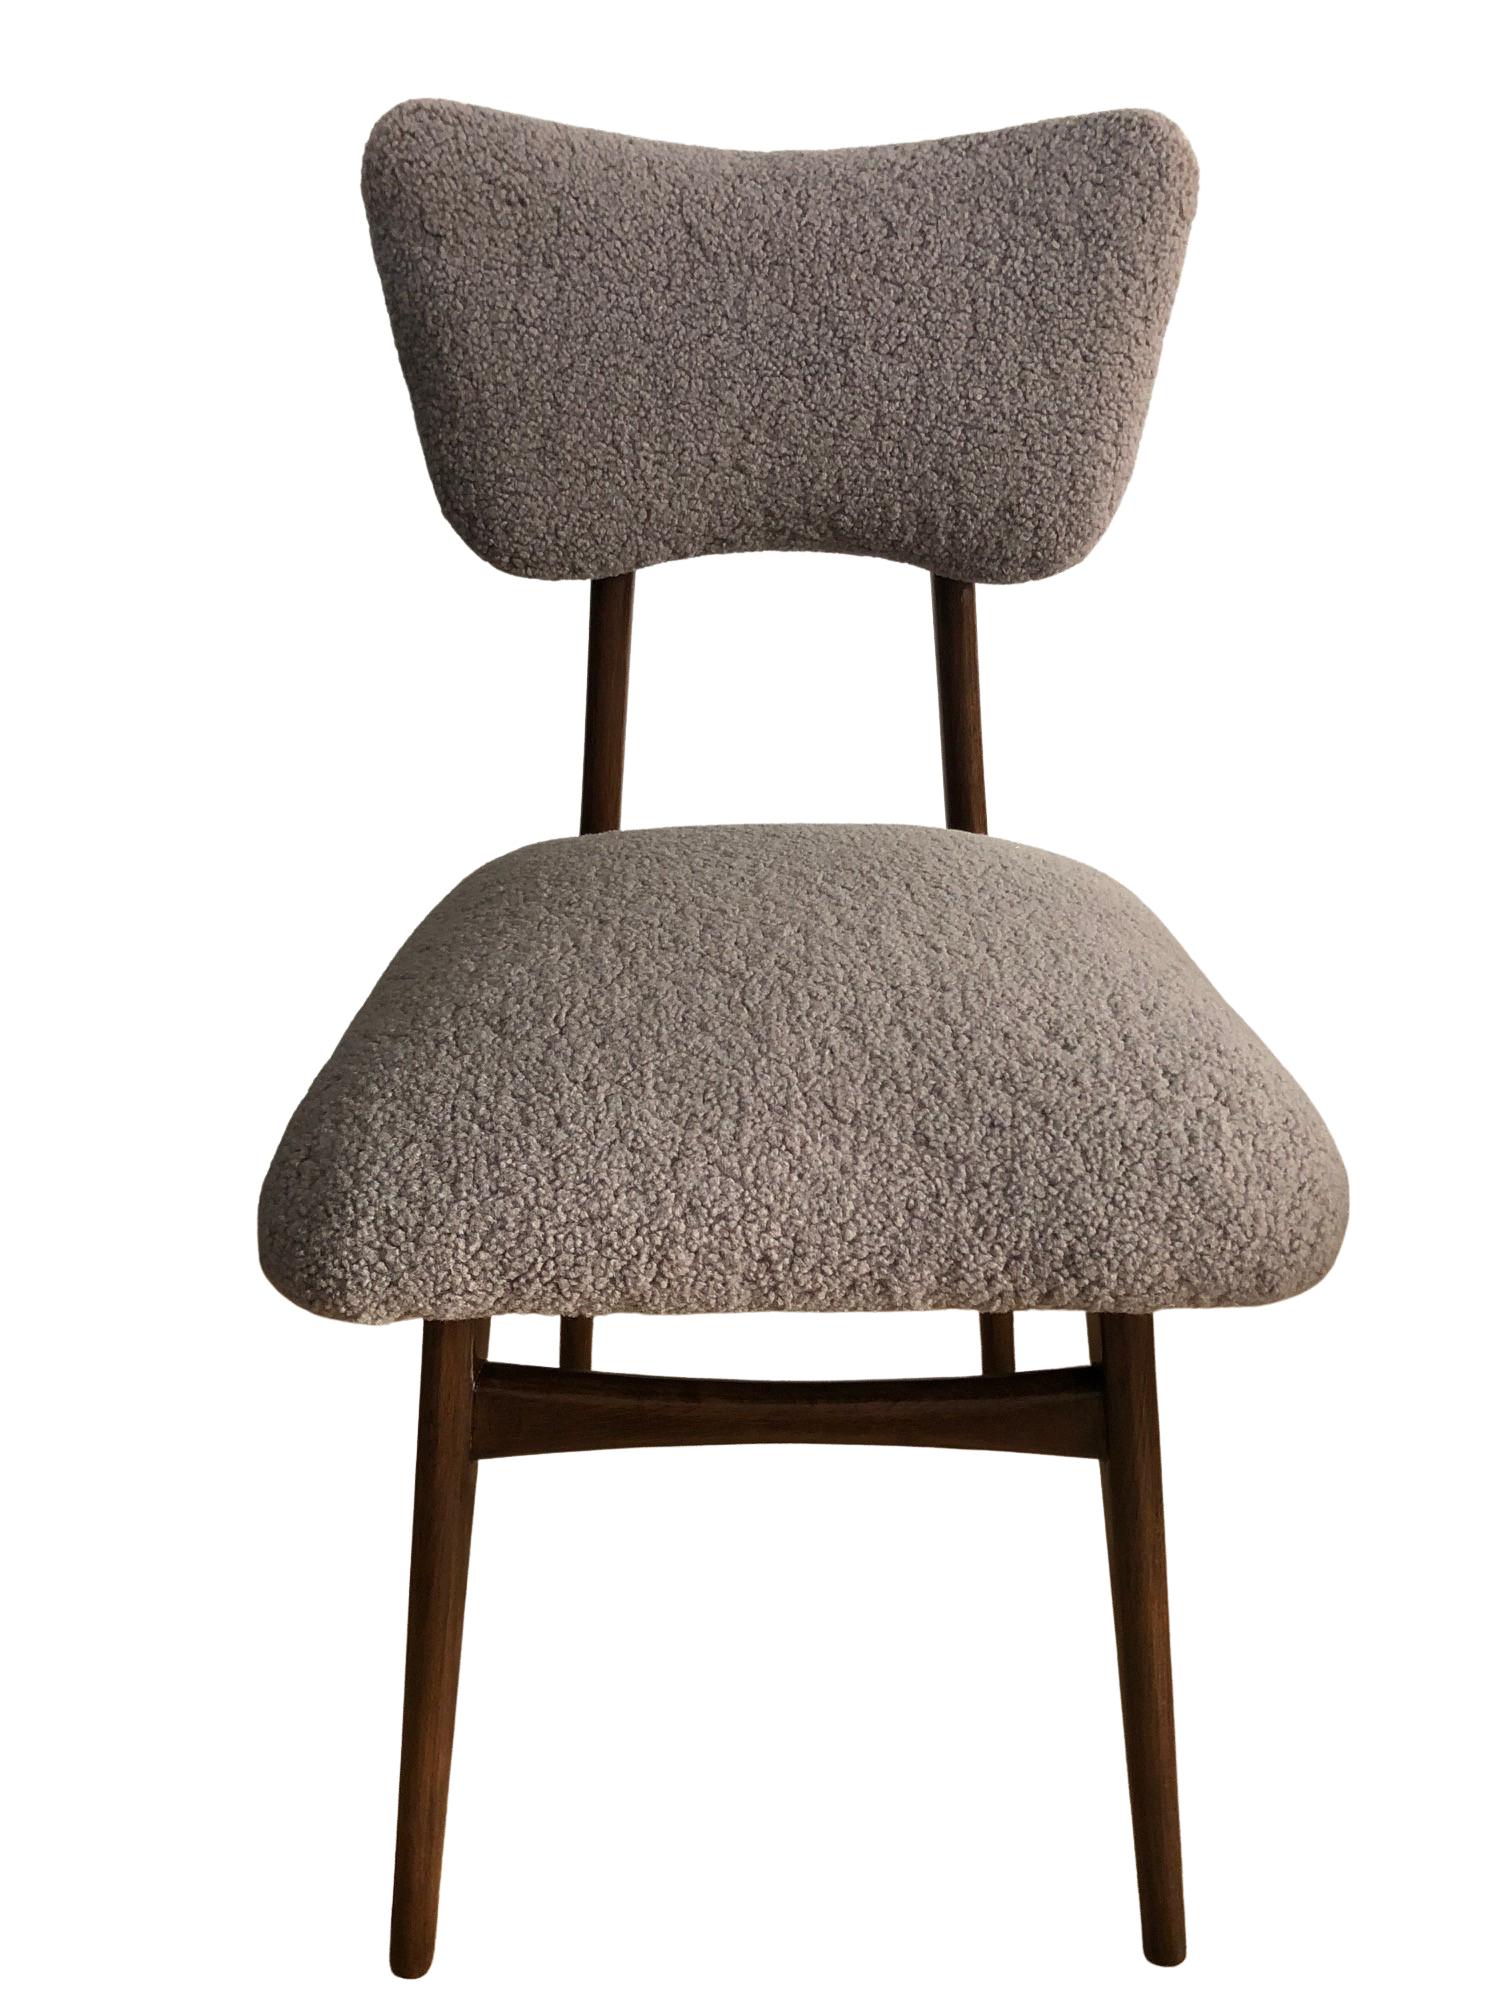 Unique set of two chairs manufactured in Poland in the 1960s, designed by Rajmund Halas. 

The upholstery is made of pleasant to touch boucle textile. It is high quality and durable italian fabric in a warm taupe (light grey light beige) color. The